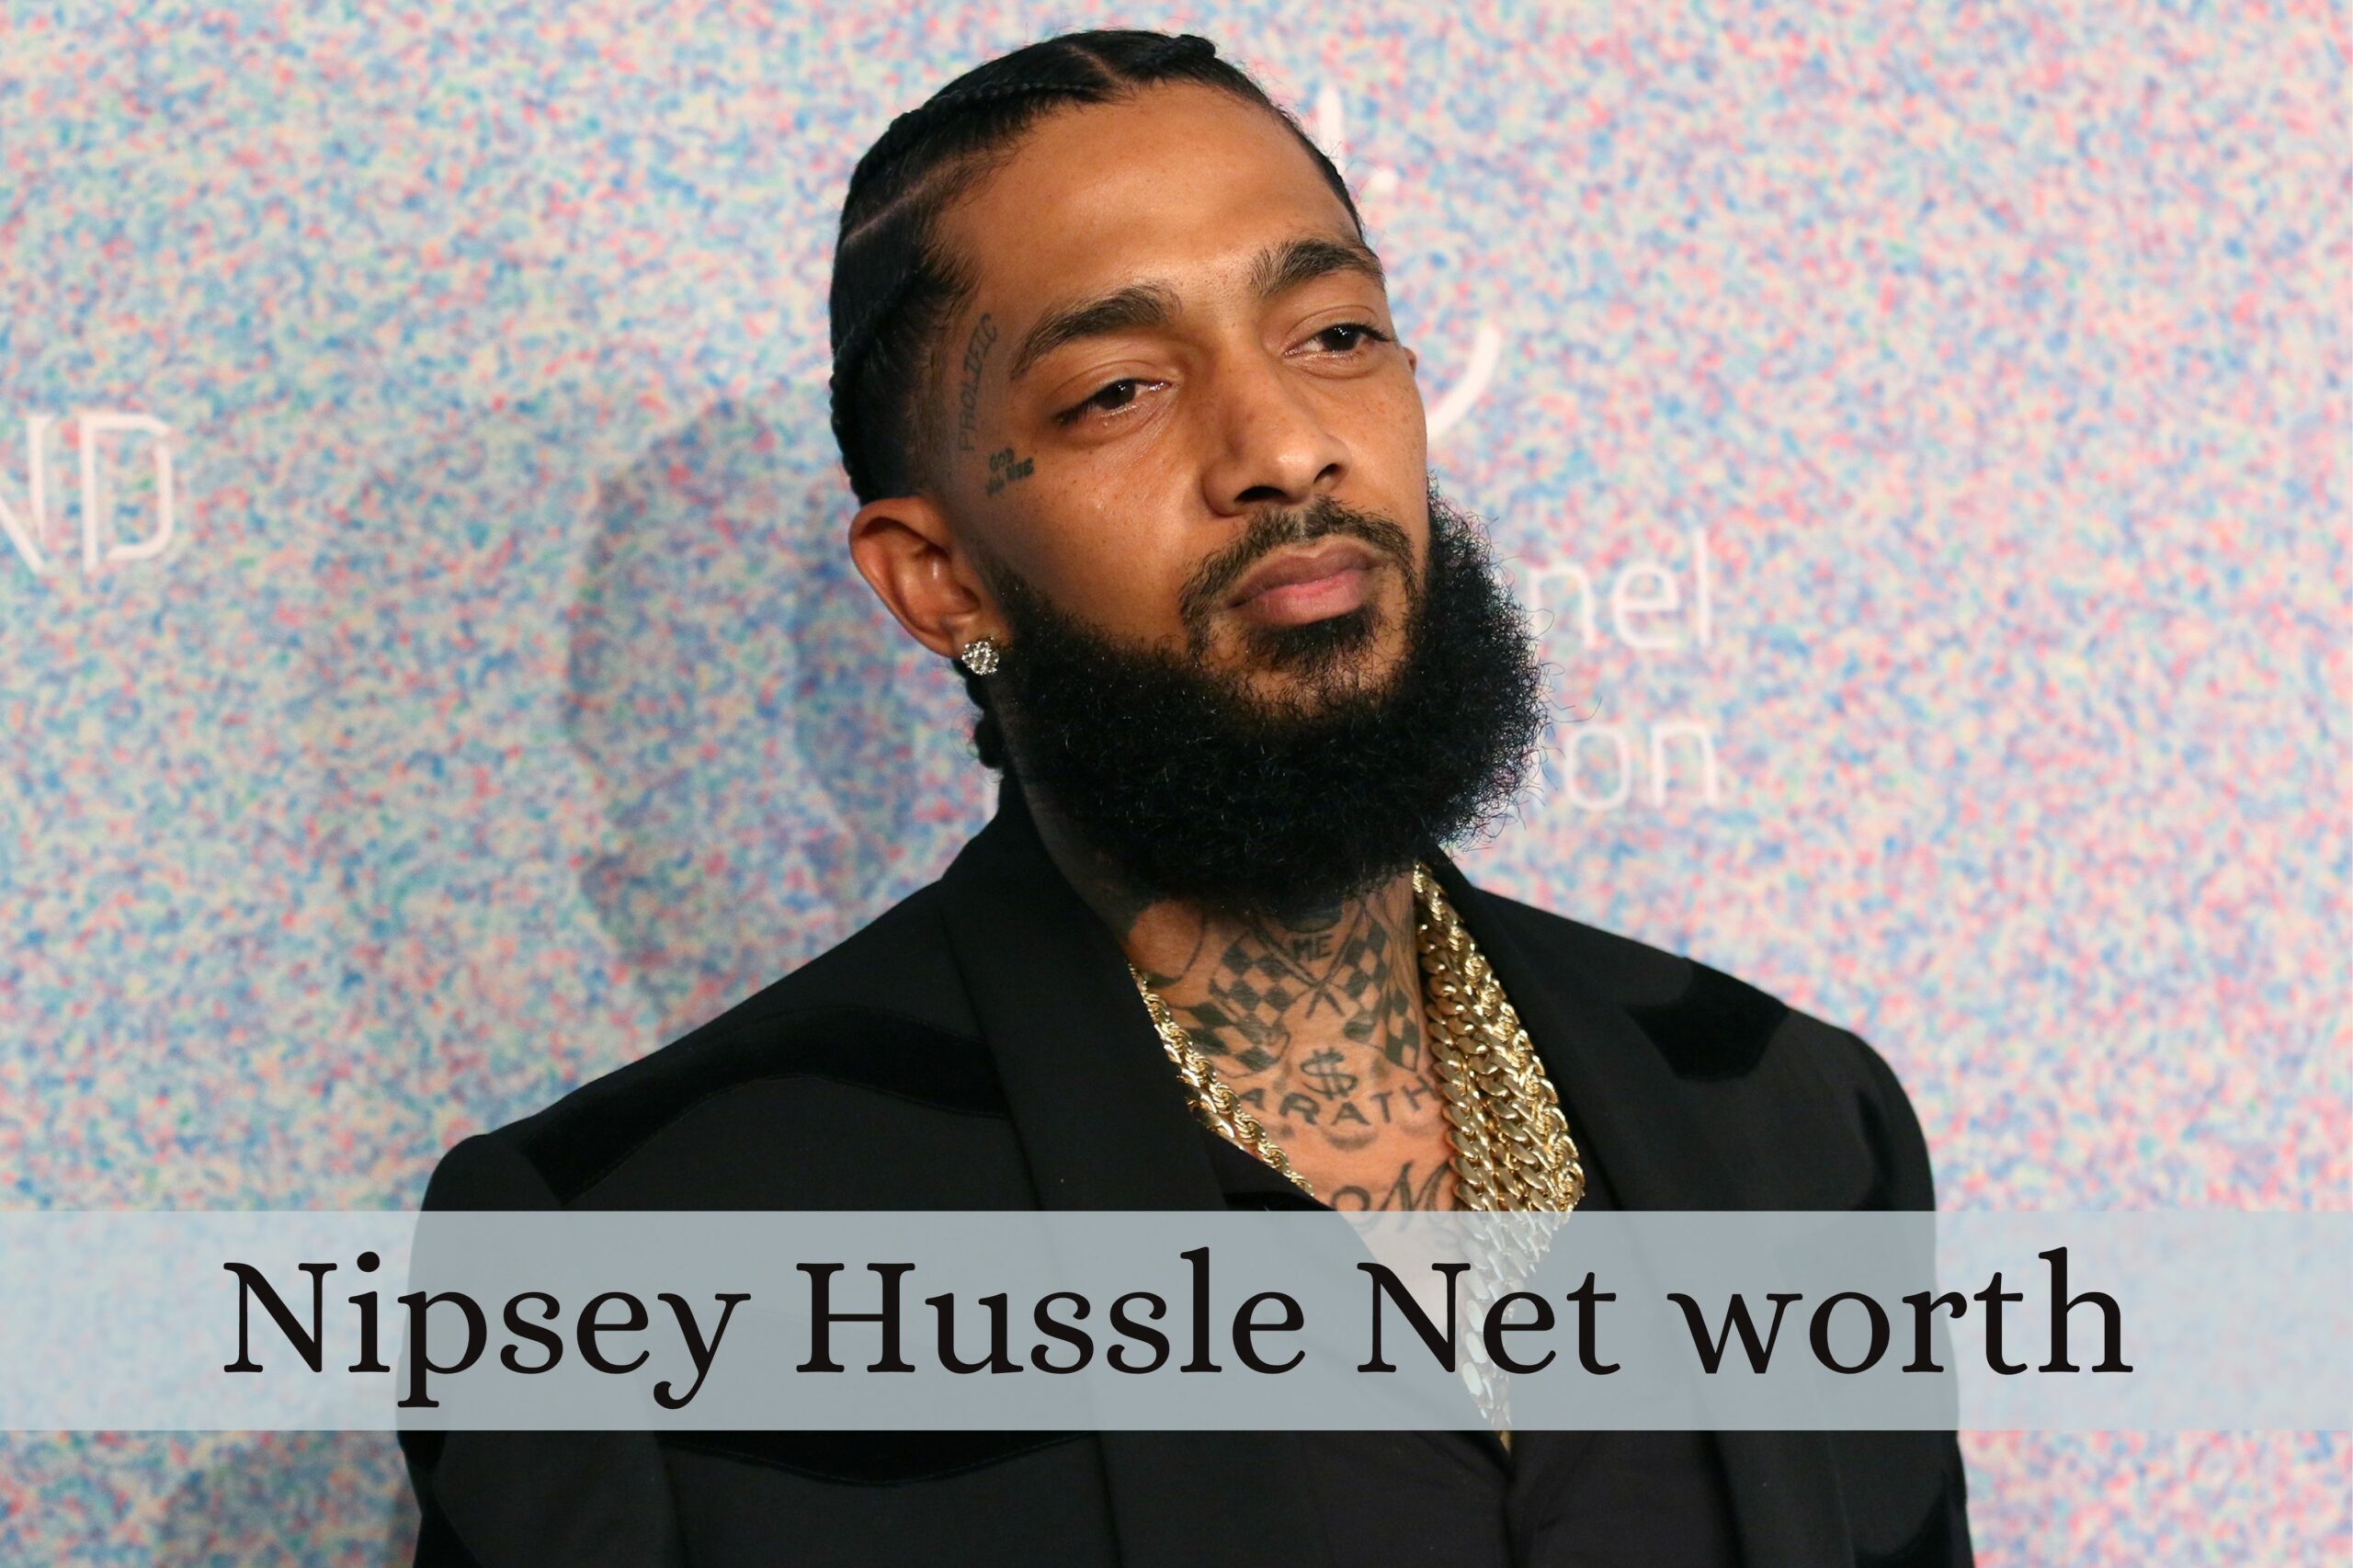 Nipsey Hussle Net worth After His Death And Who Killed Him and Why?